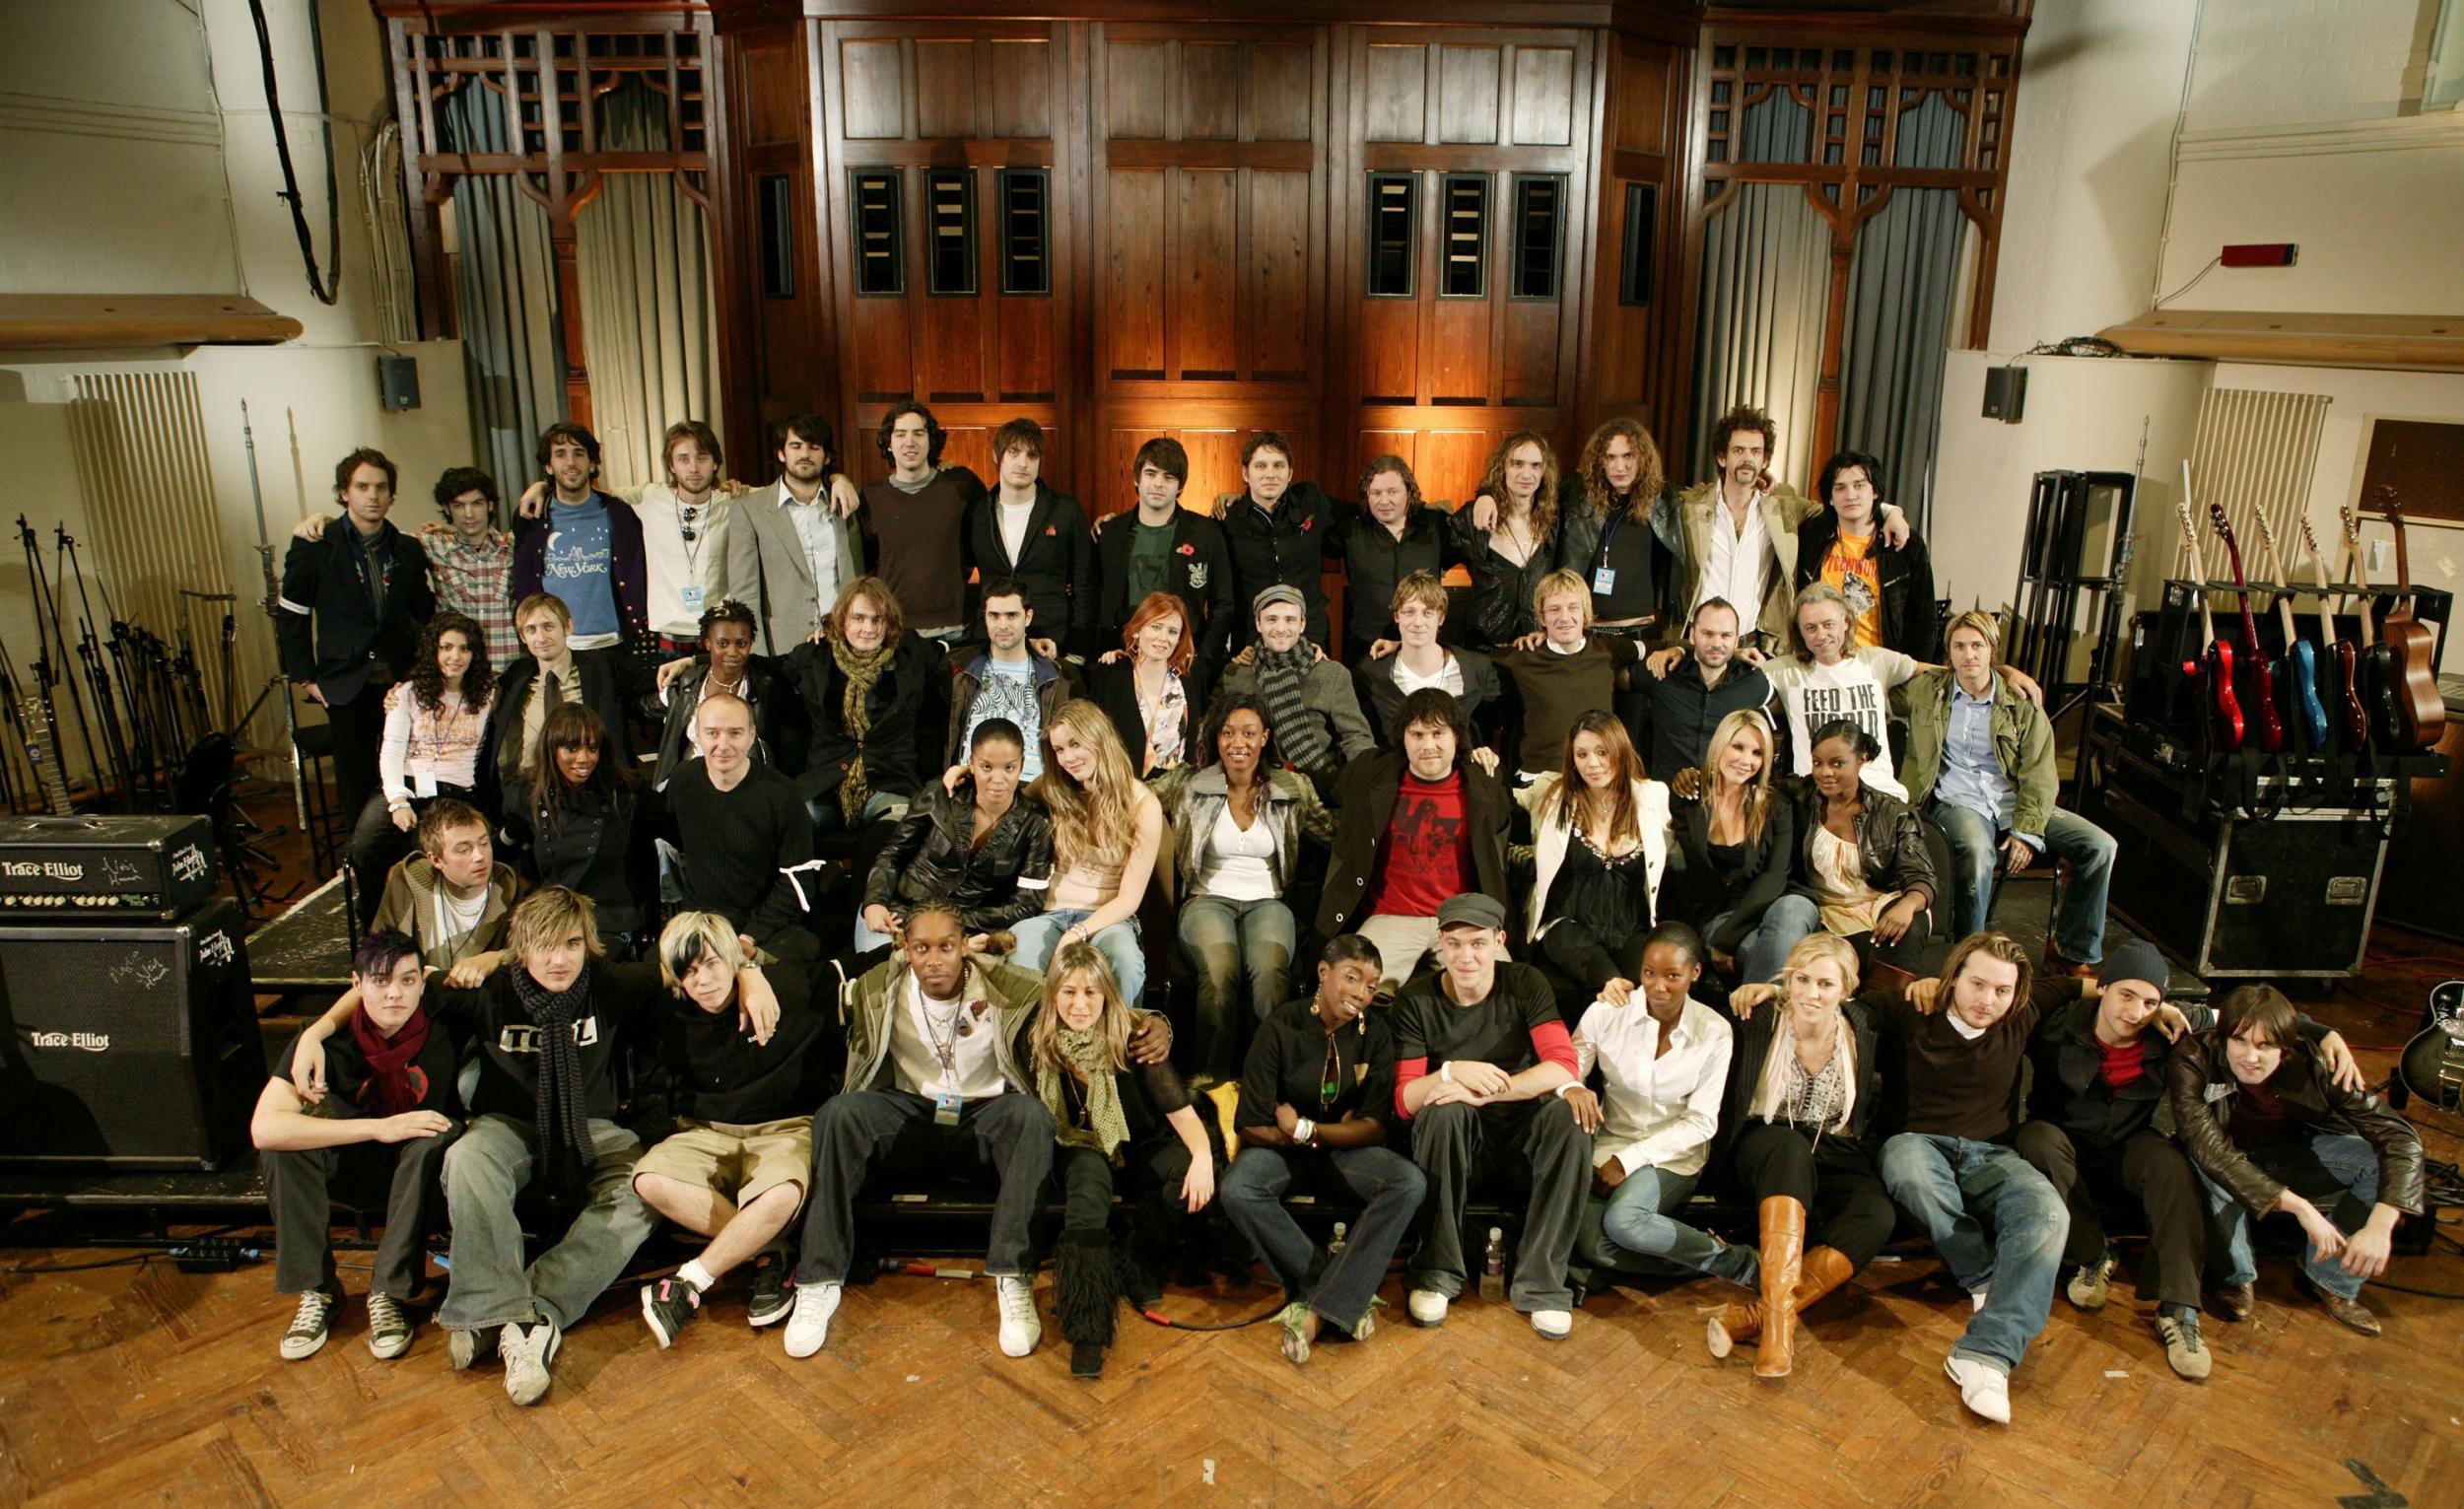 Top British musical artists come together for Band-Aid